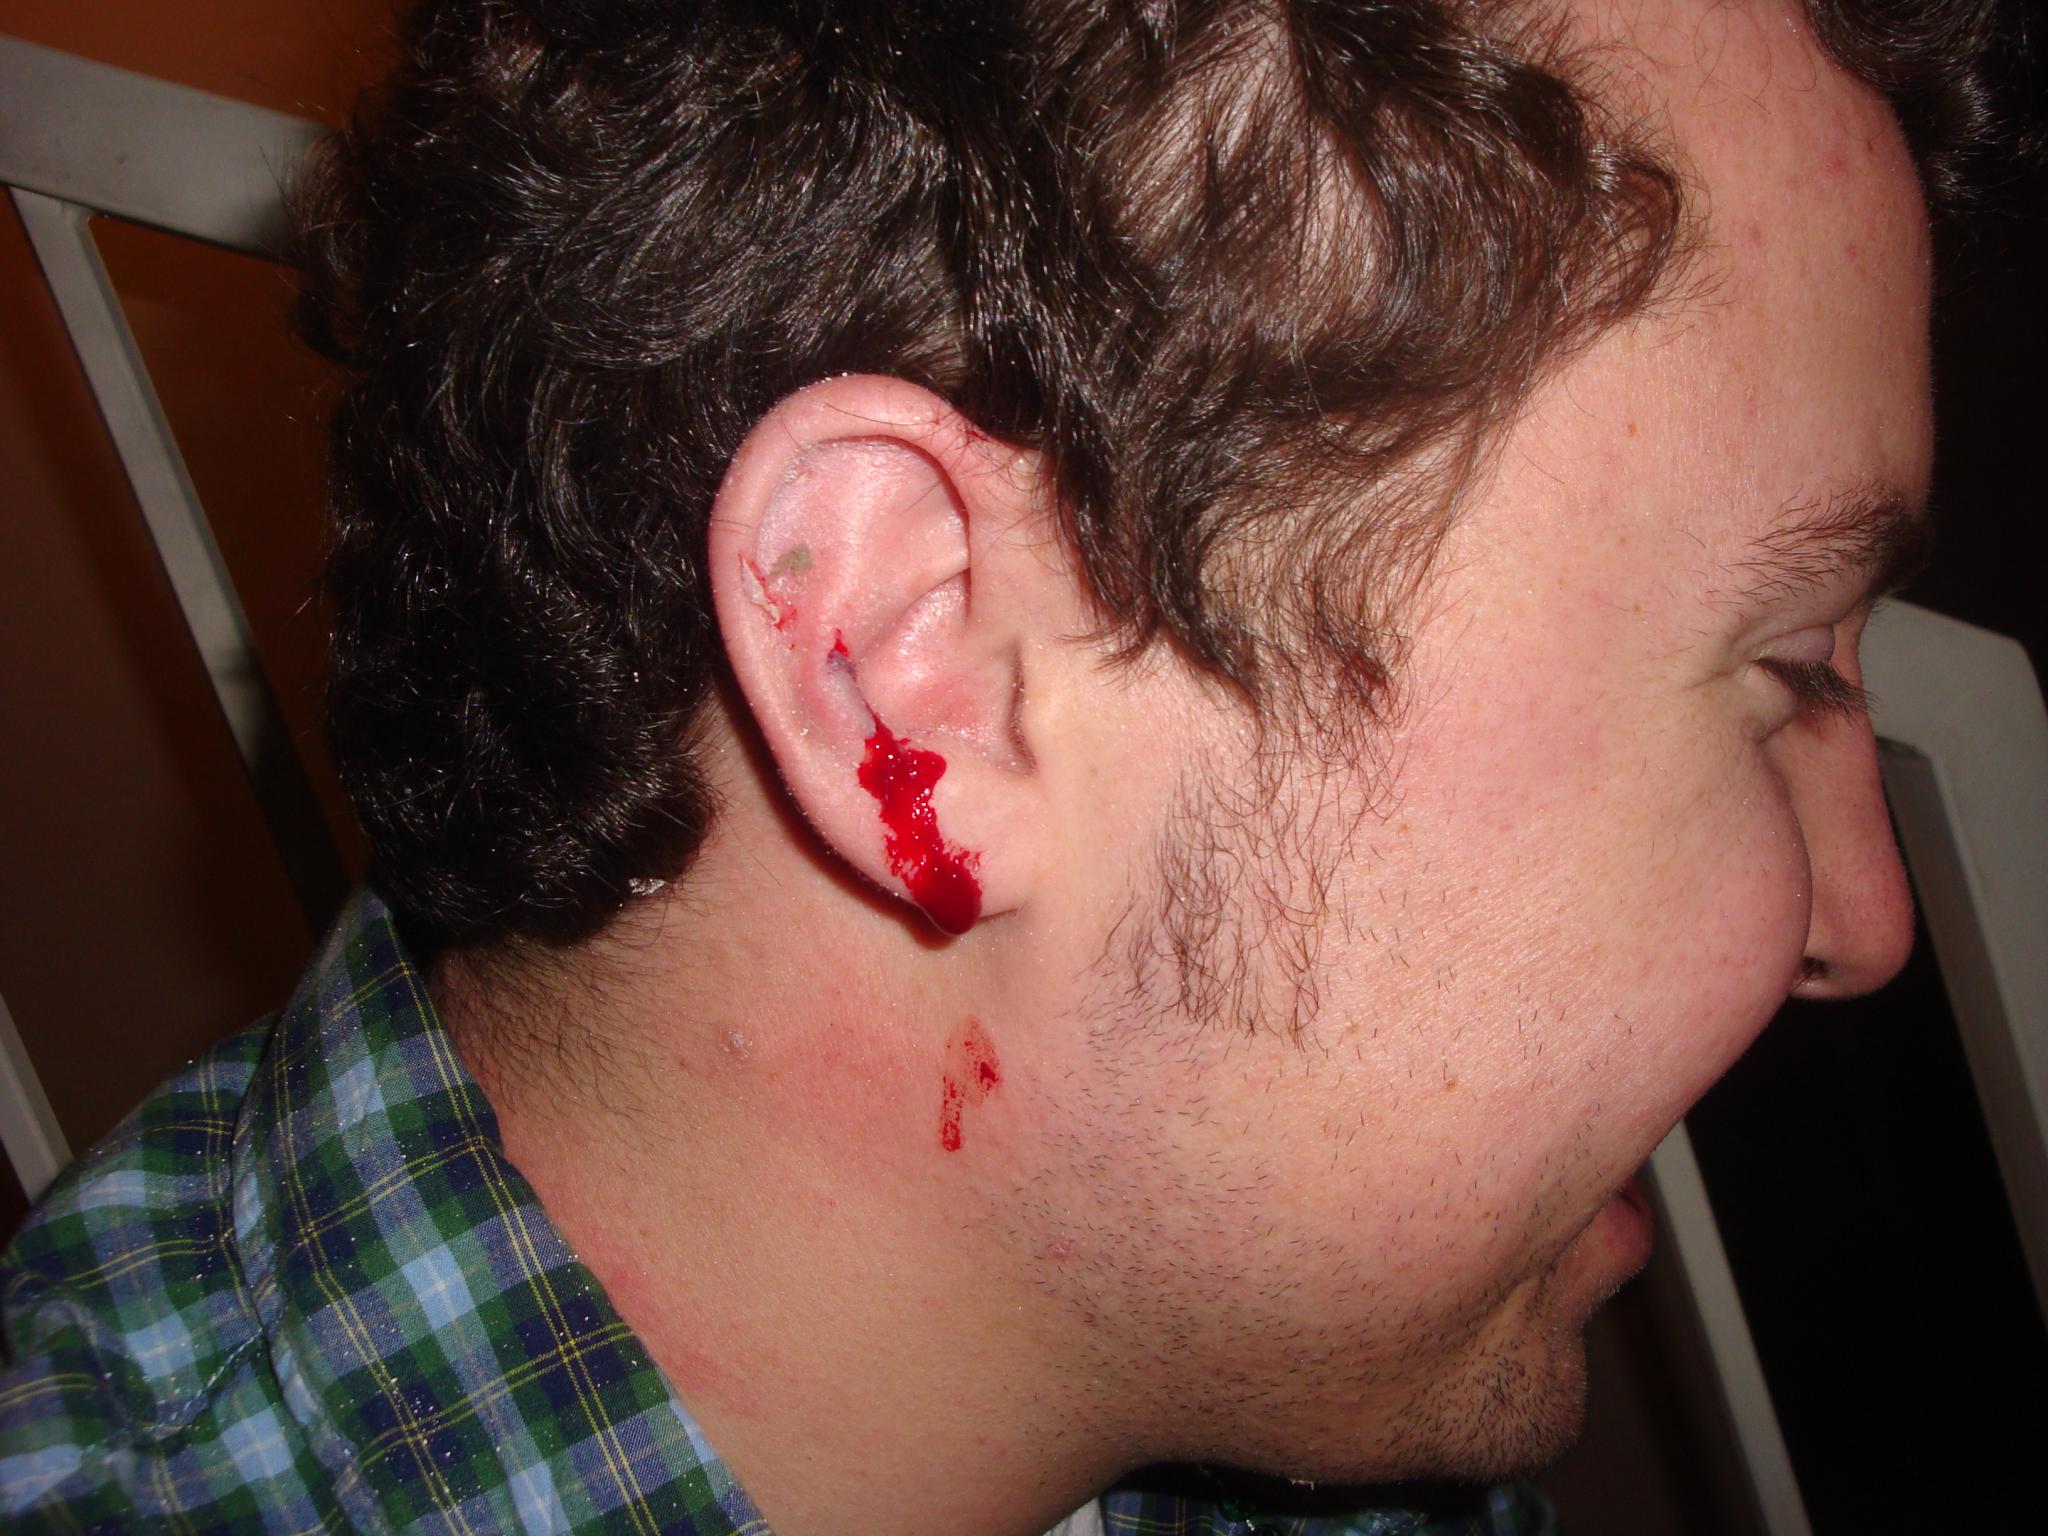 a close up view of a man with a bleeding ear